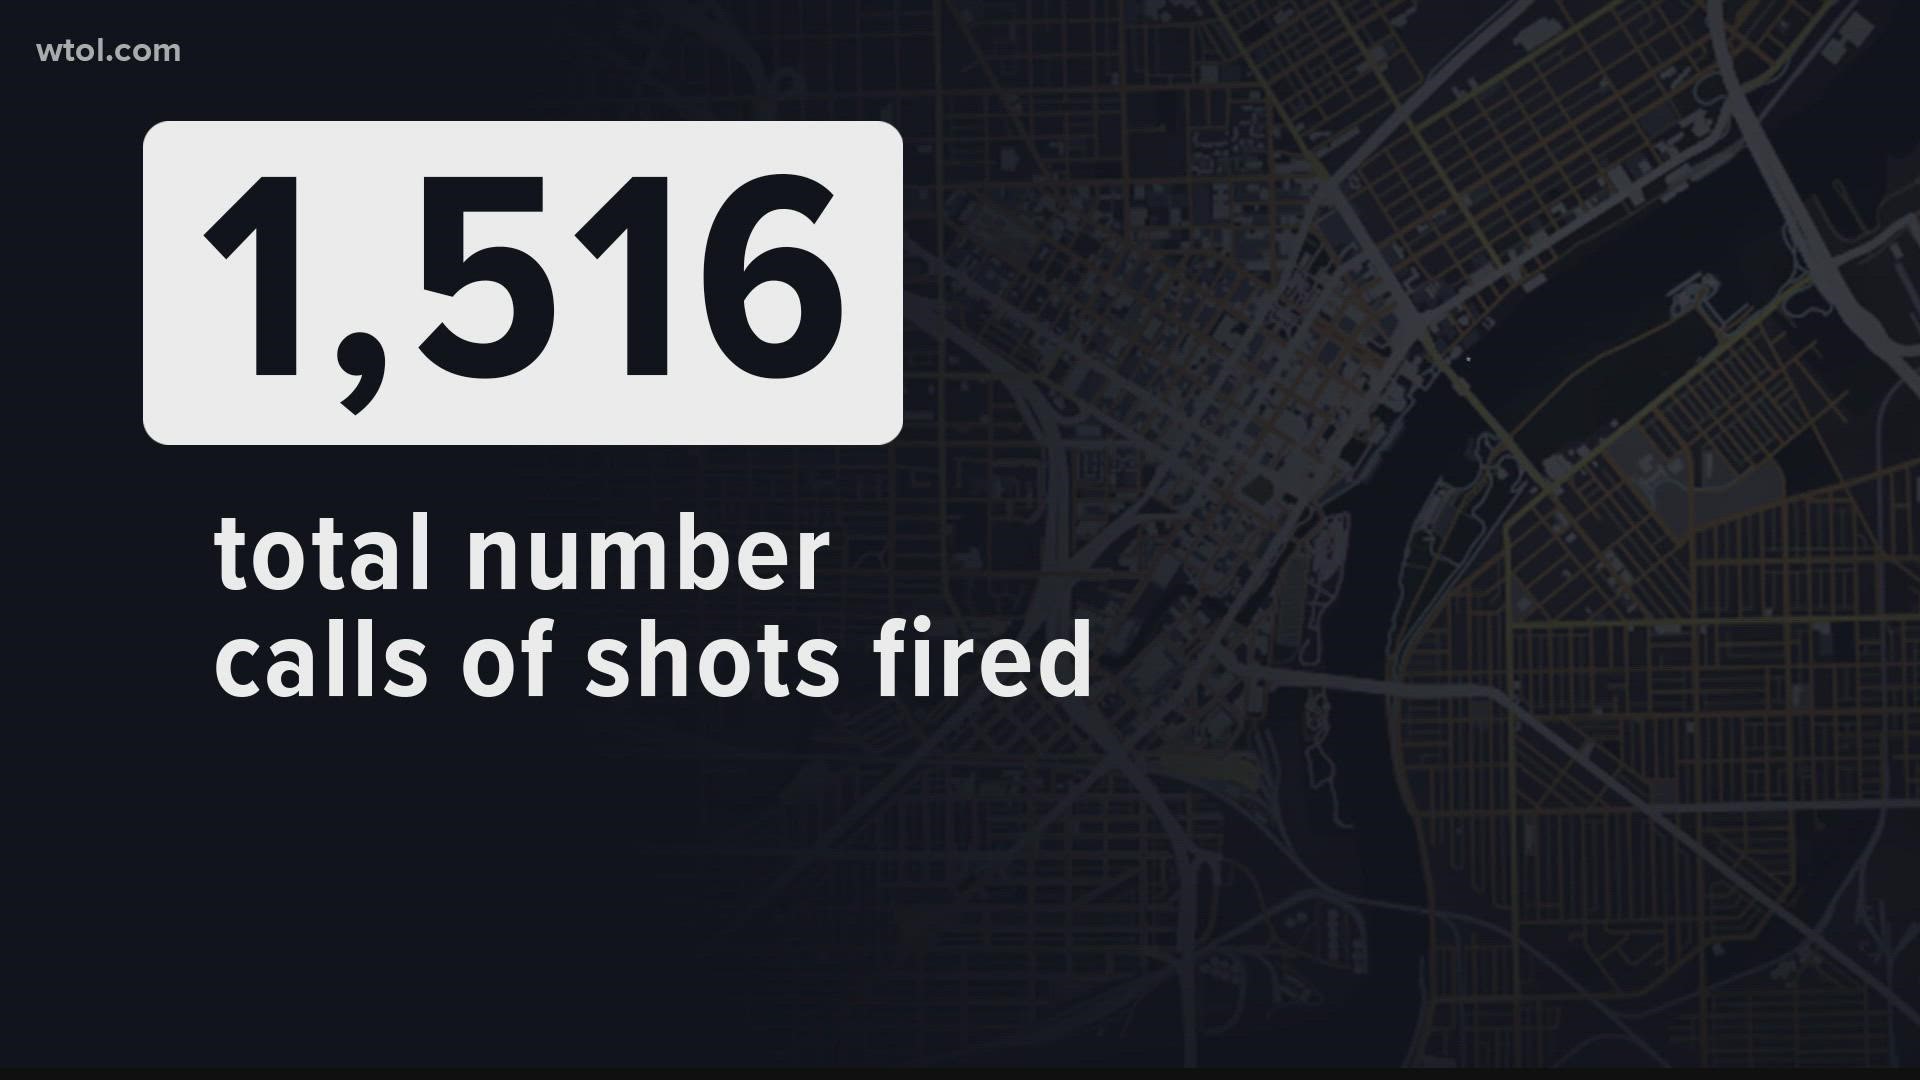 For the first of our three-day series, 11 Investigates went through more than 1,500 calls to the Toledo Police Department for shots fired. Here's what we uncovered.